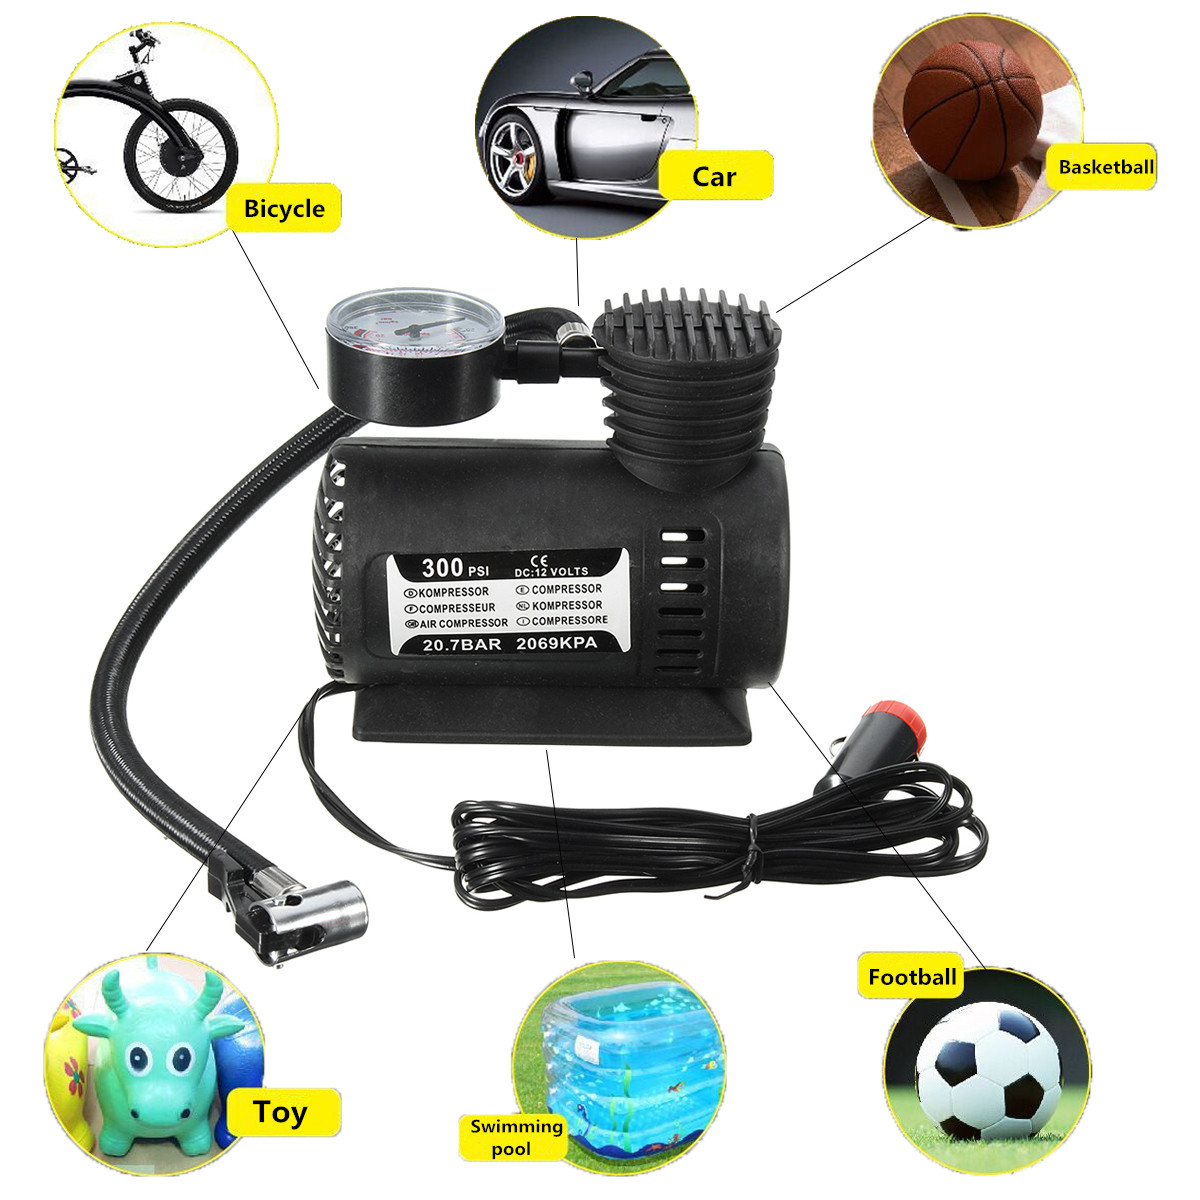 DC-12V-300PSI-Car-Air-Compressor-Portable-Tire-Inflator-Air-Pump-For-Motorcycle-Car-Auto-Bicycle-1715750-5